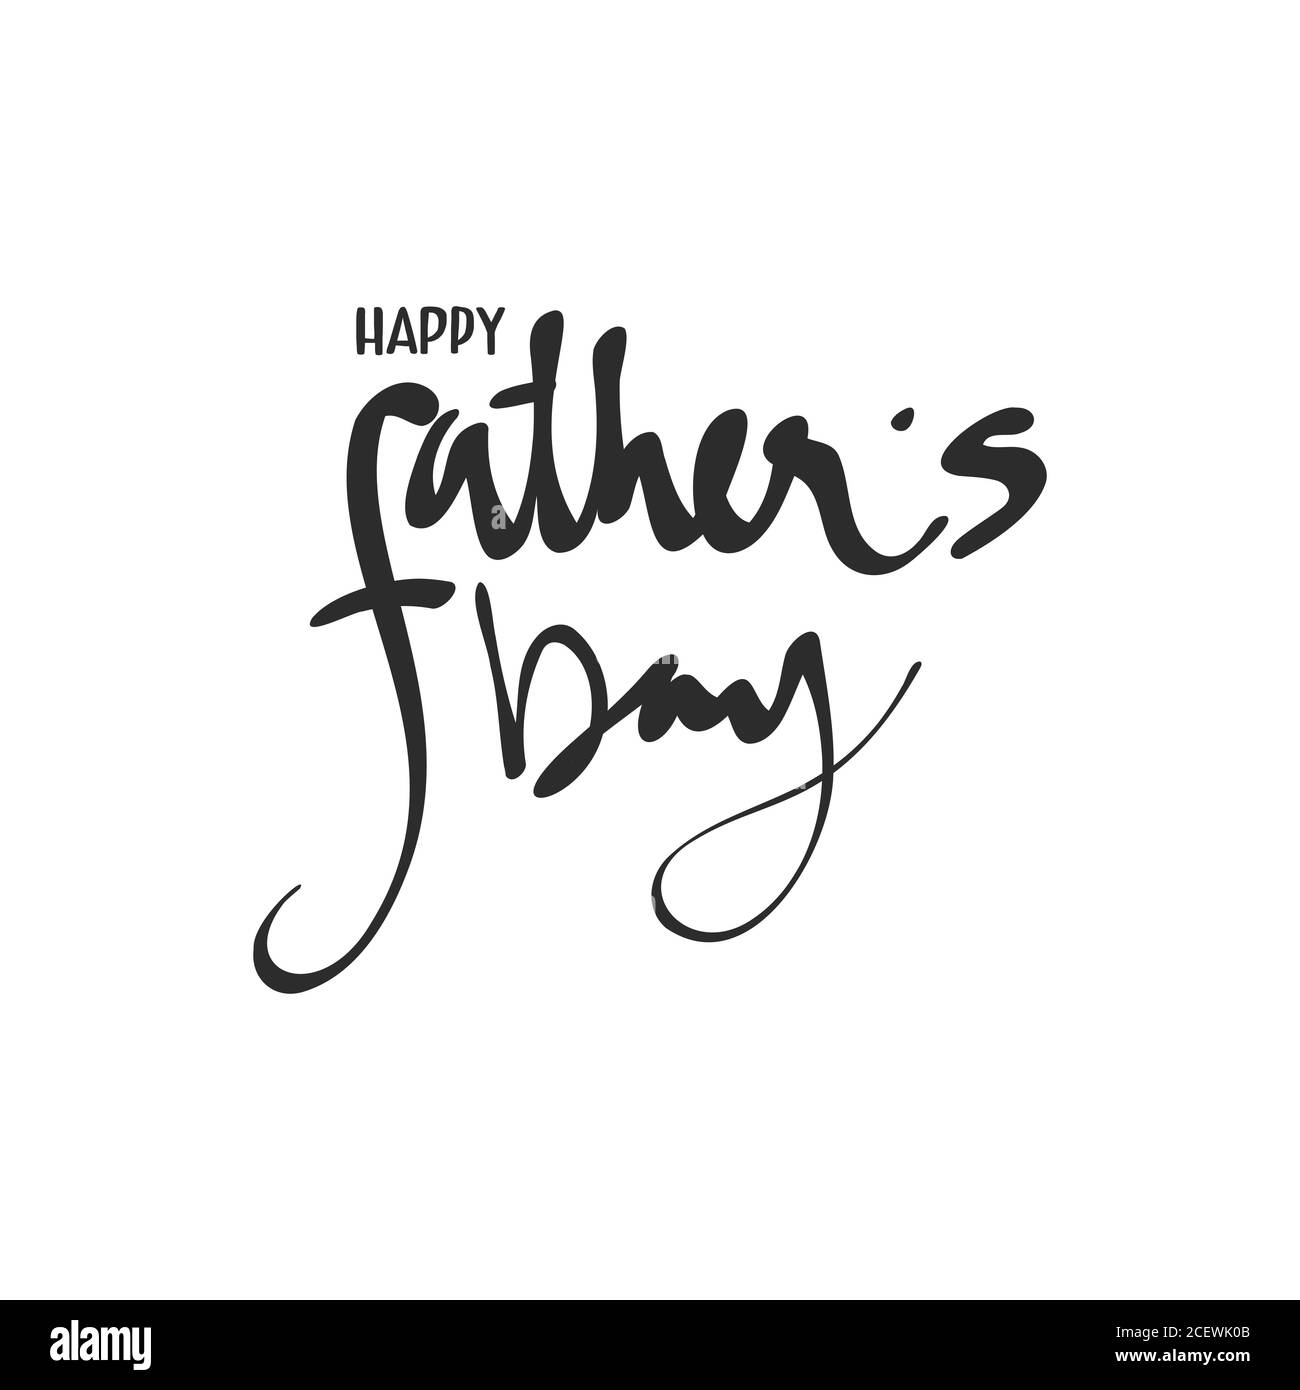 Doodle Design for celebrating Happy fathers day. Template for greeting card, Banner, flyer, invitation, congratulation, poster design. Vector illustra Stock Vector